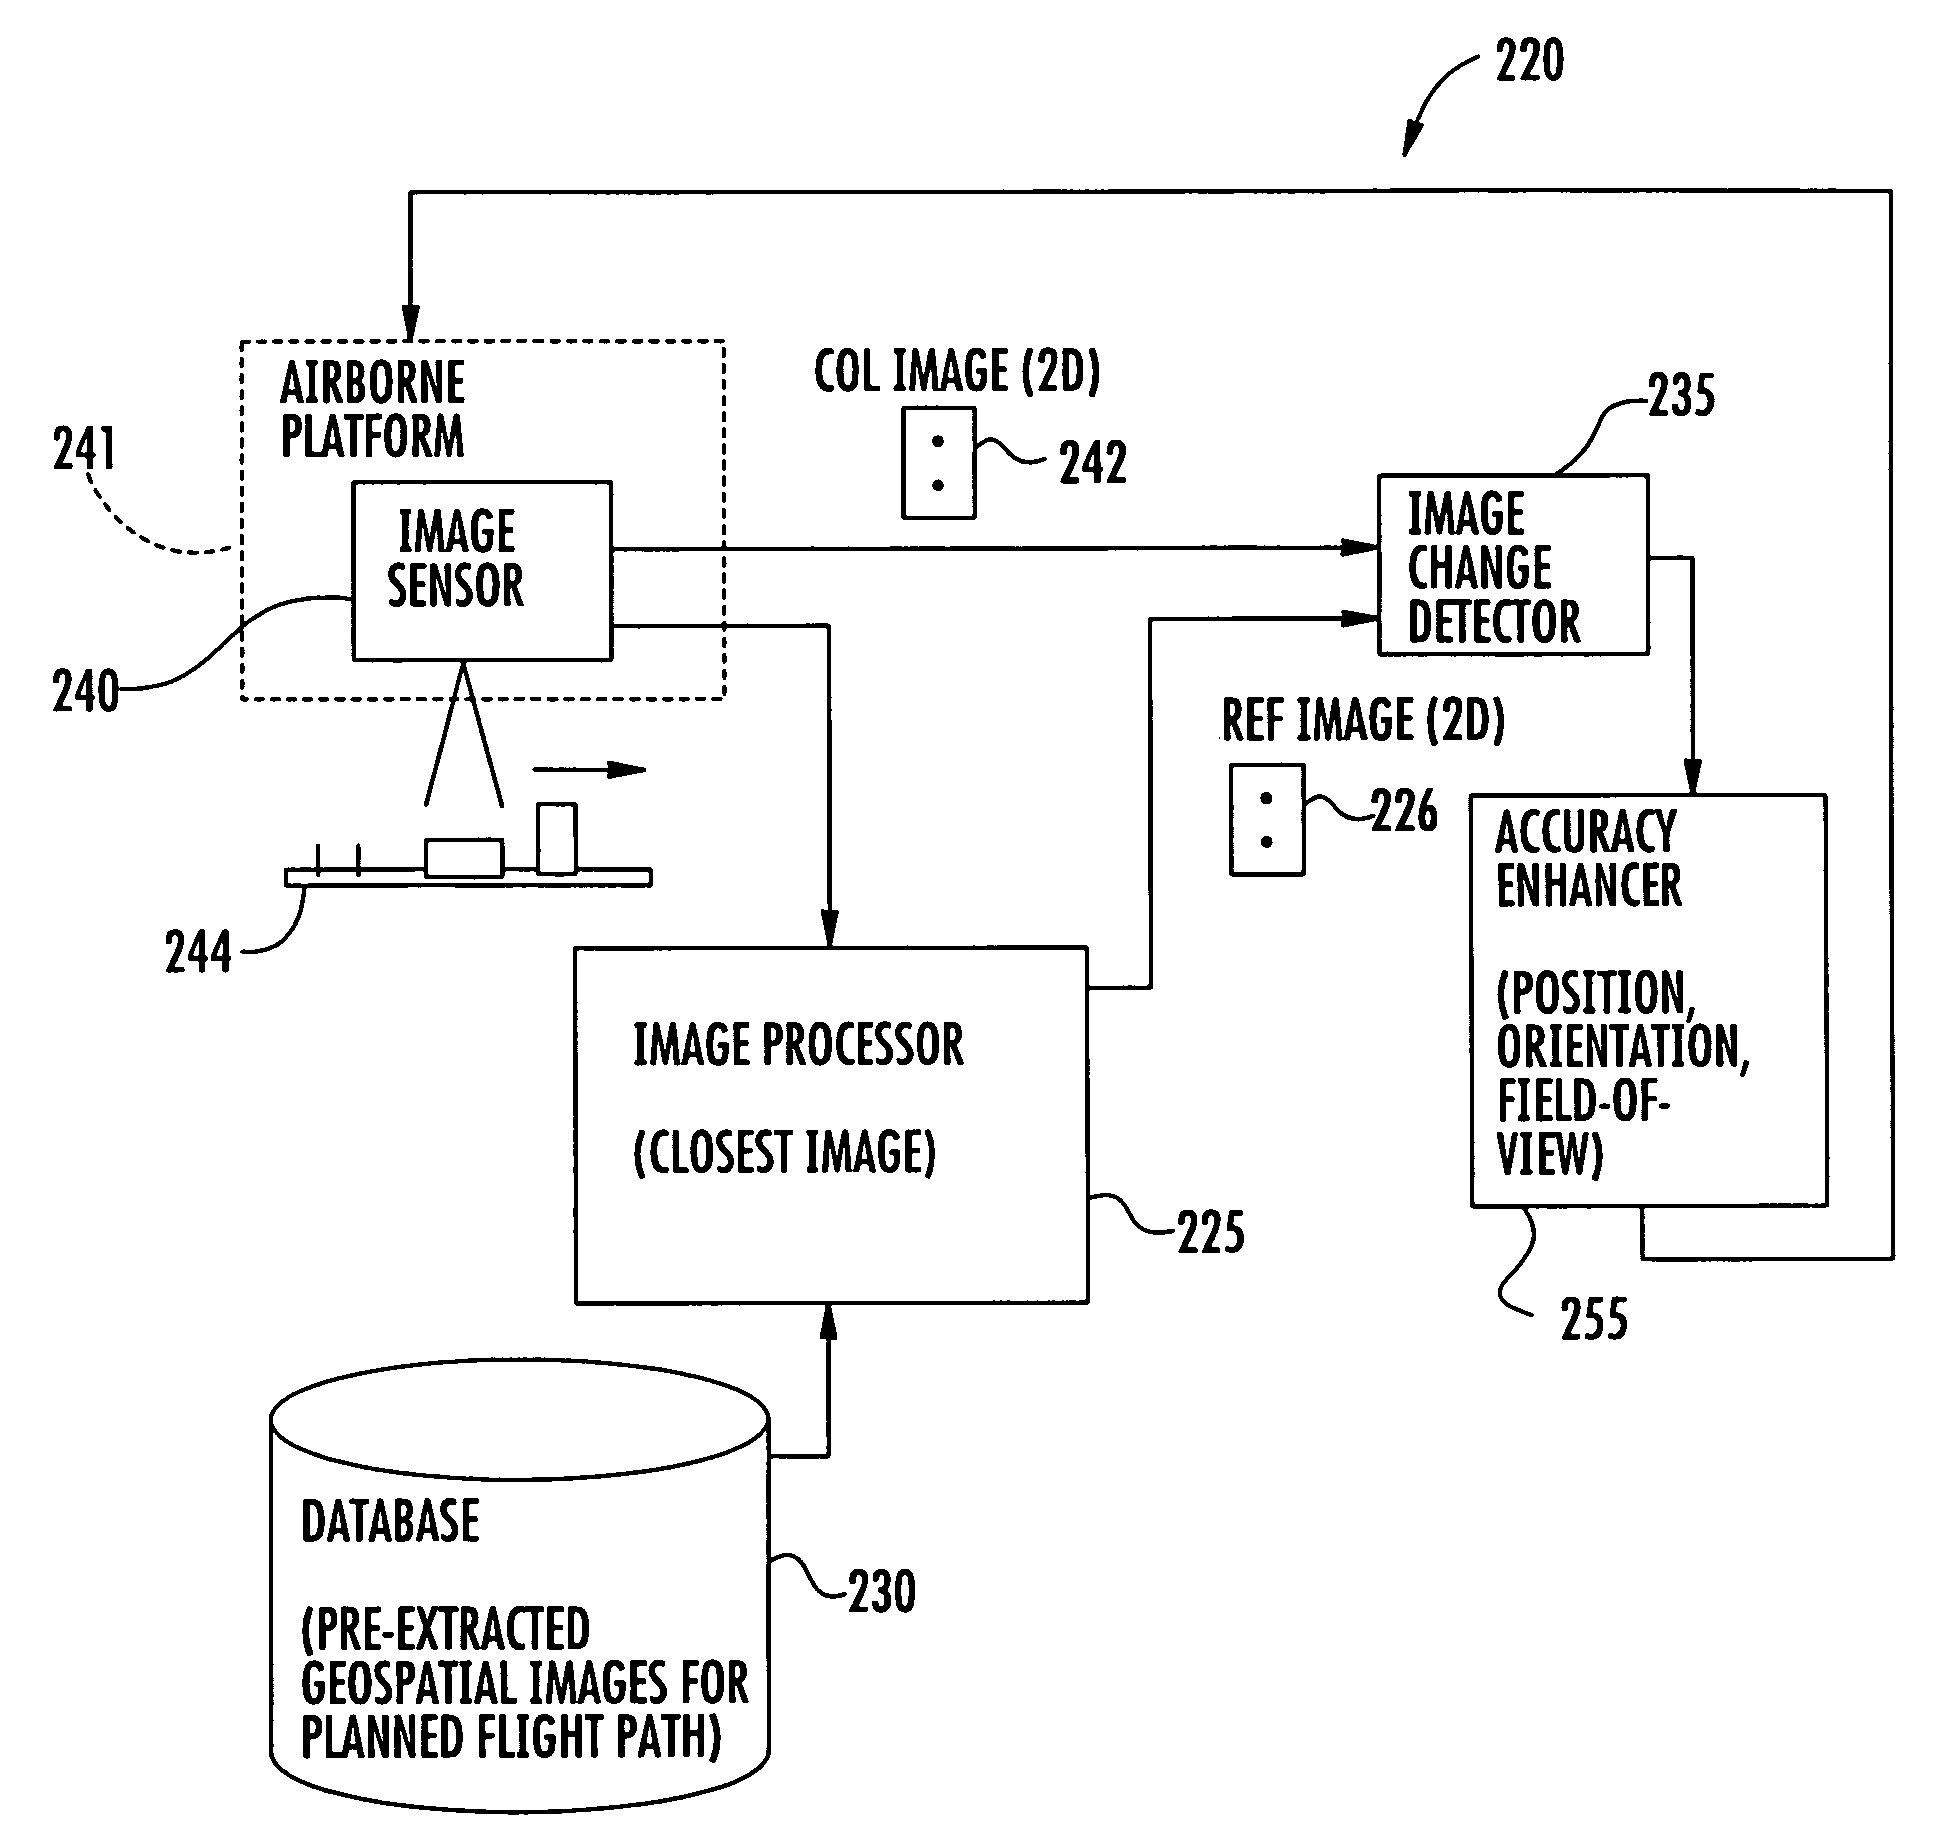 Accuracy enhancing system for geospatial collection value of an image sensor aboard an airborne platform and associated methods